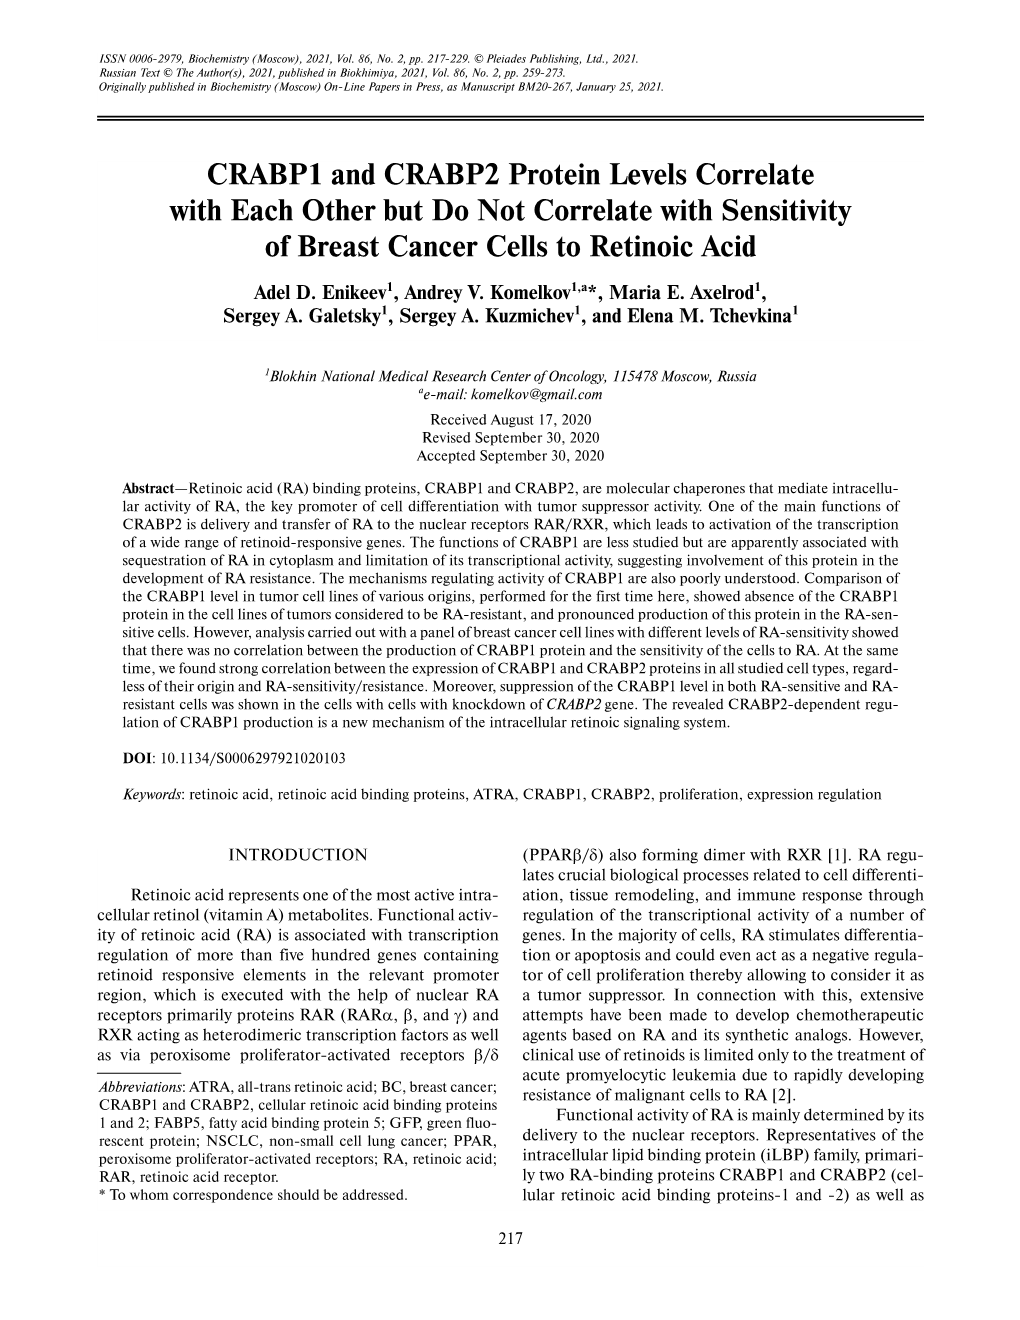 CRABP1 and CRABP2 Protein Levels Correlate with Each Other but Do Not Correlate with Sensitivity of Breast Cancer Cells to Retinoic Acid